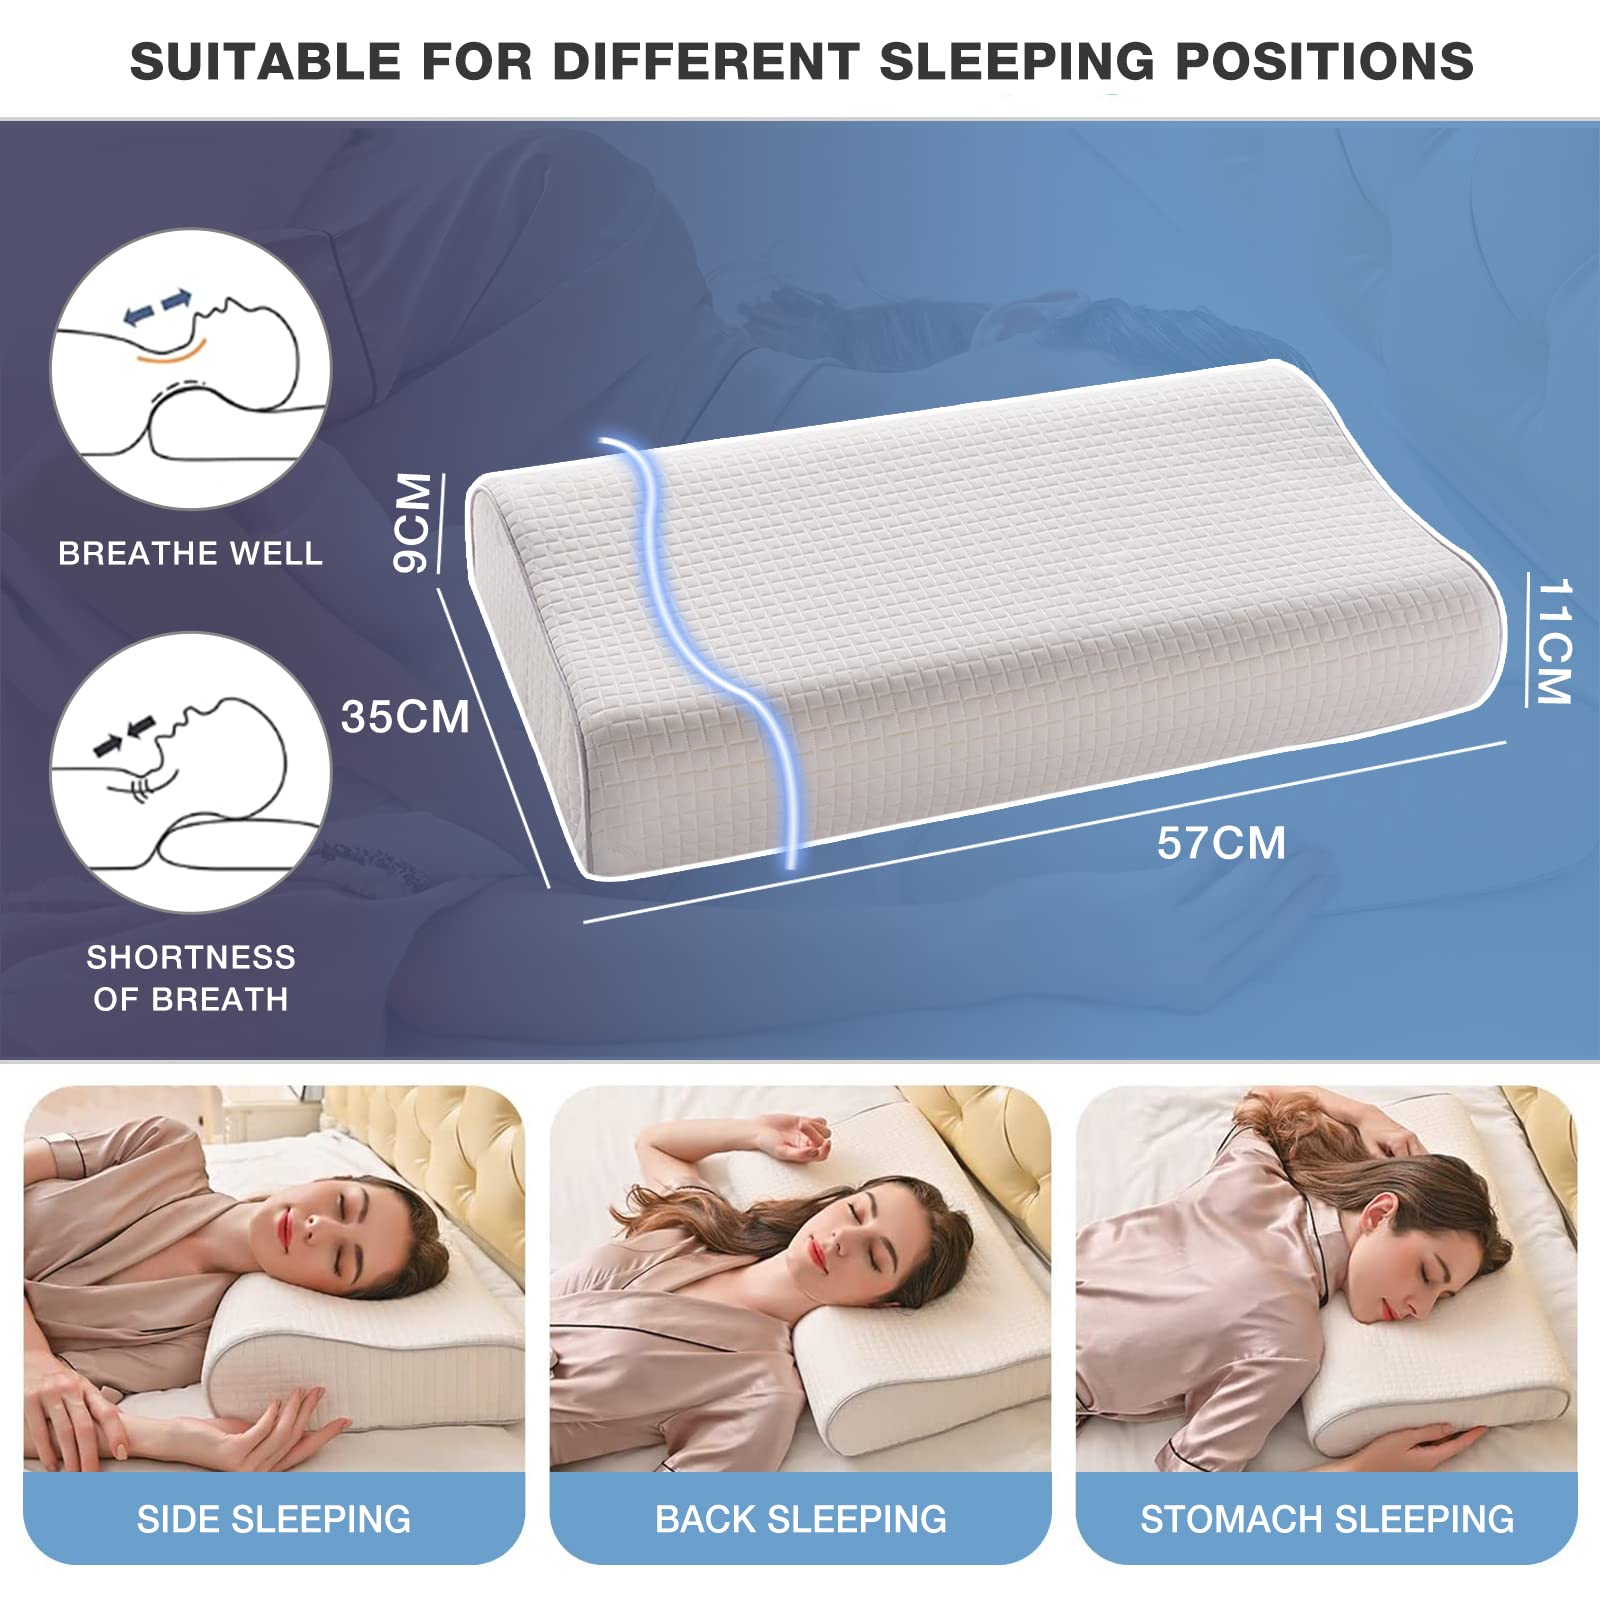 UlikTree Memory Foam Pillow for Neck and Shoulder Pain Washable Cover Cooling Standard Size Bed for Back, Side,Stomach Sleepers Provides Deeper Sleep